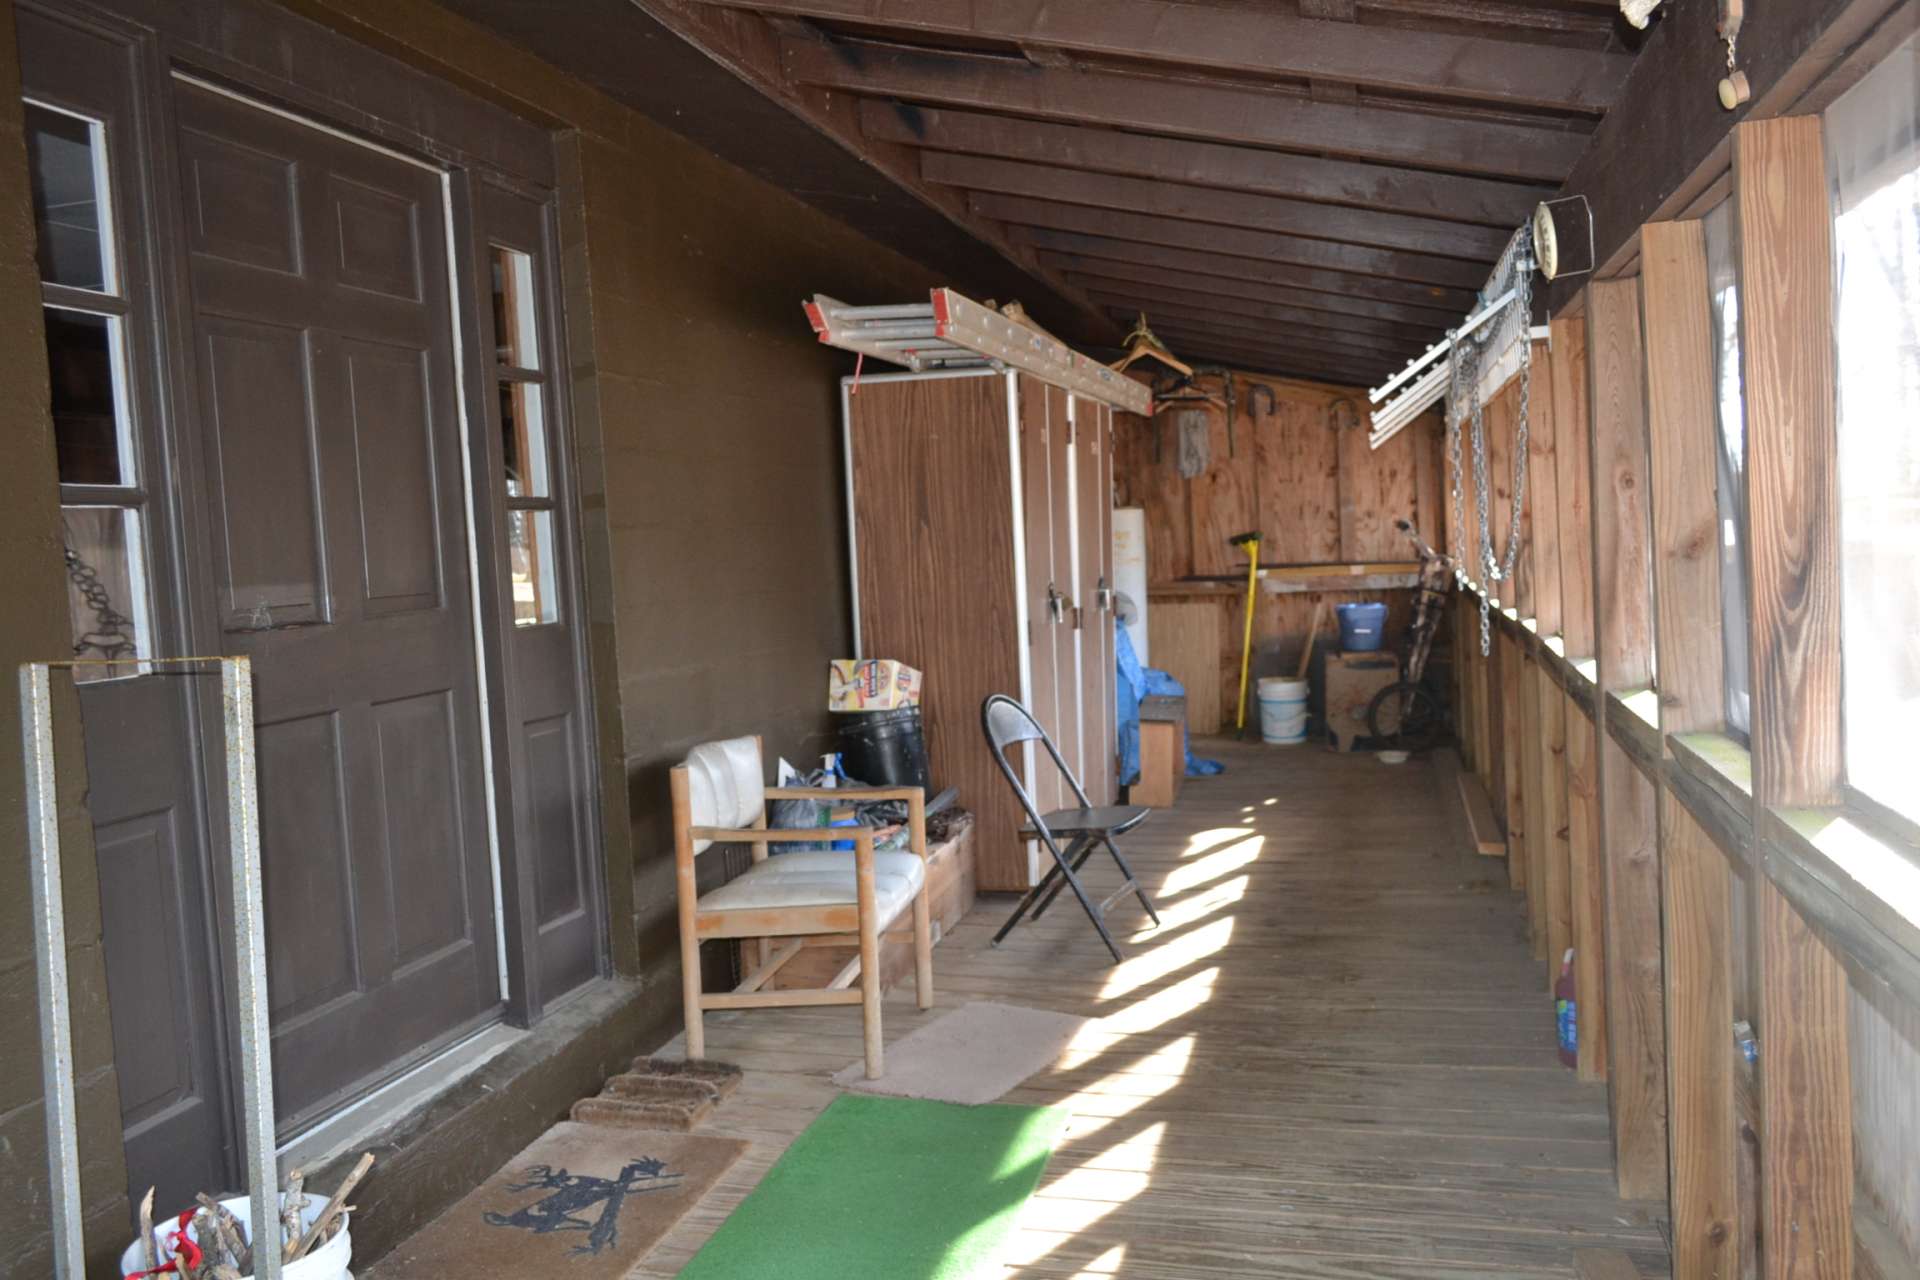 You will enter the cabin from the enclosed covered porch that provides plenty of storage space and expanding the living space during the warmer months.